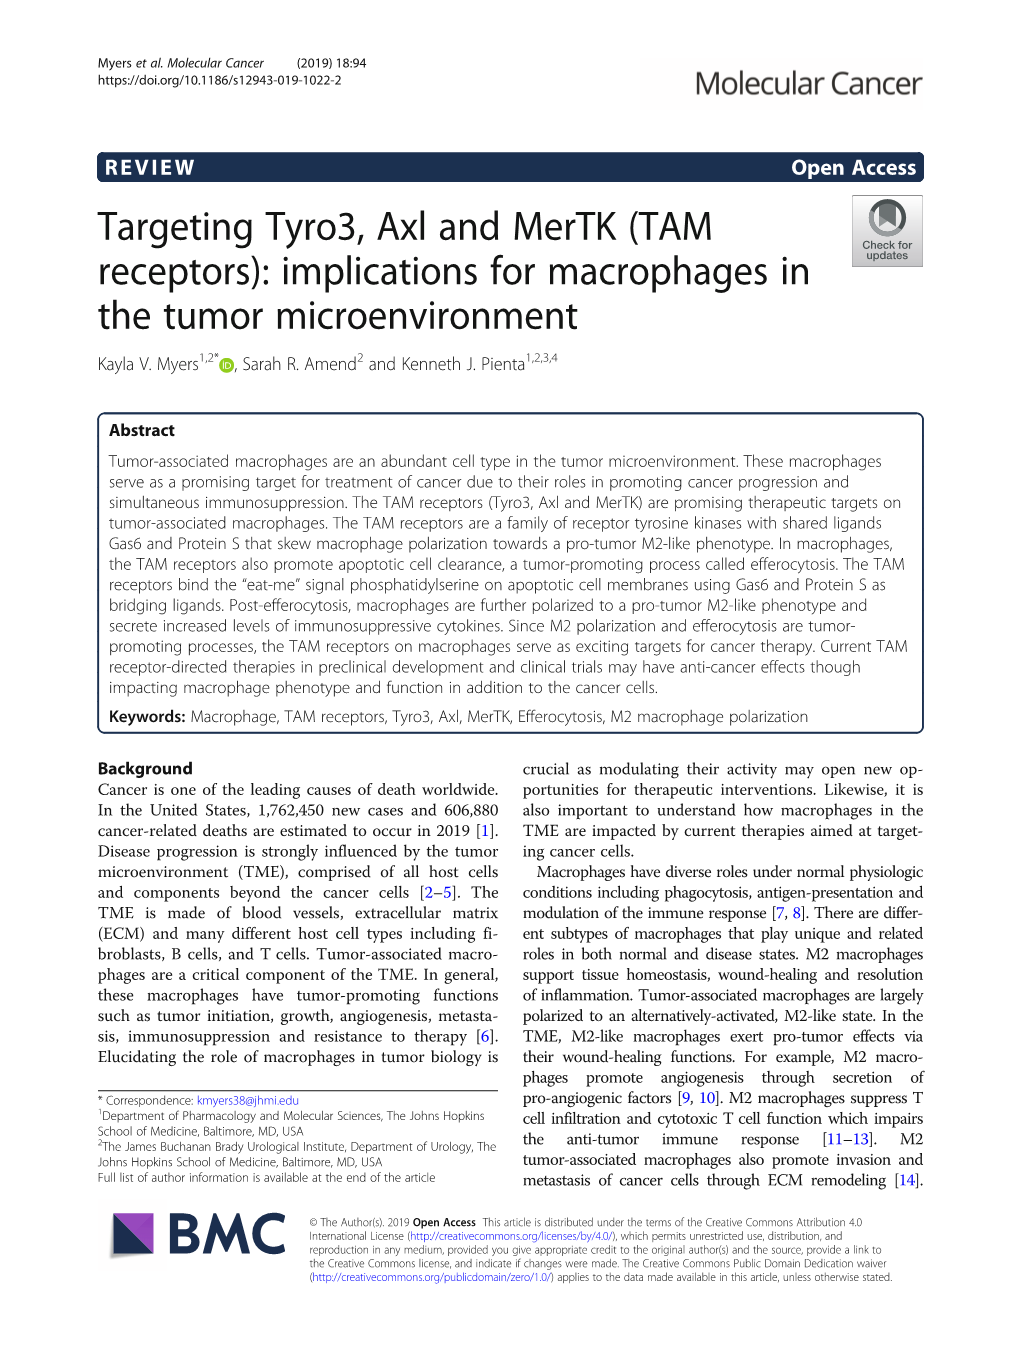 Targeting Tyro3, Axl and Mertk (TAM Receptors): Implications for Macrophages in the Tumor Microenvironment Kayla V